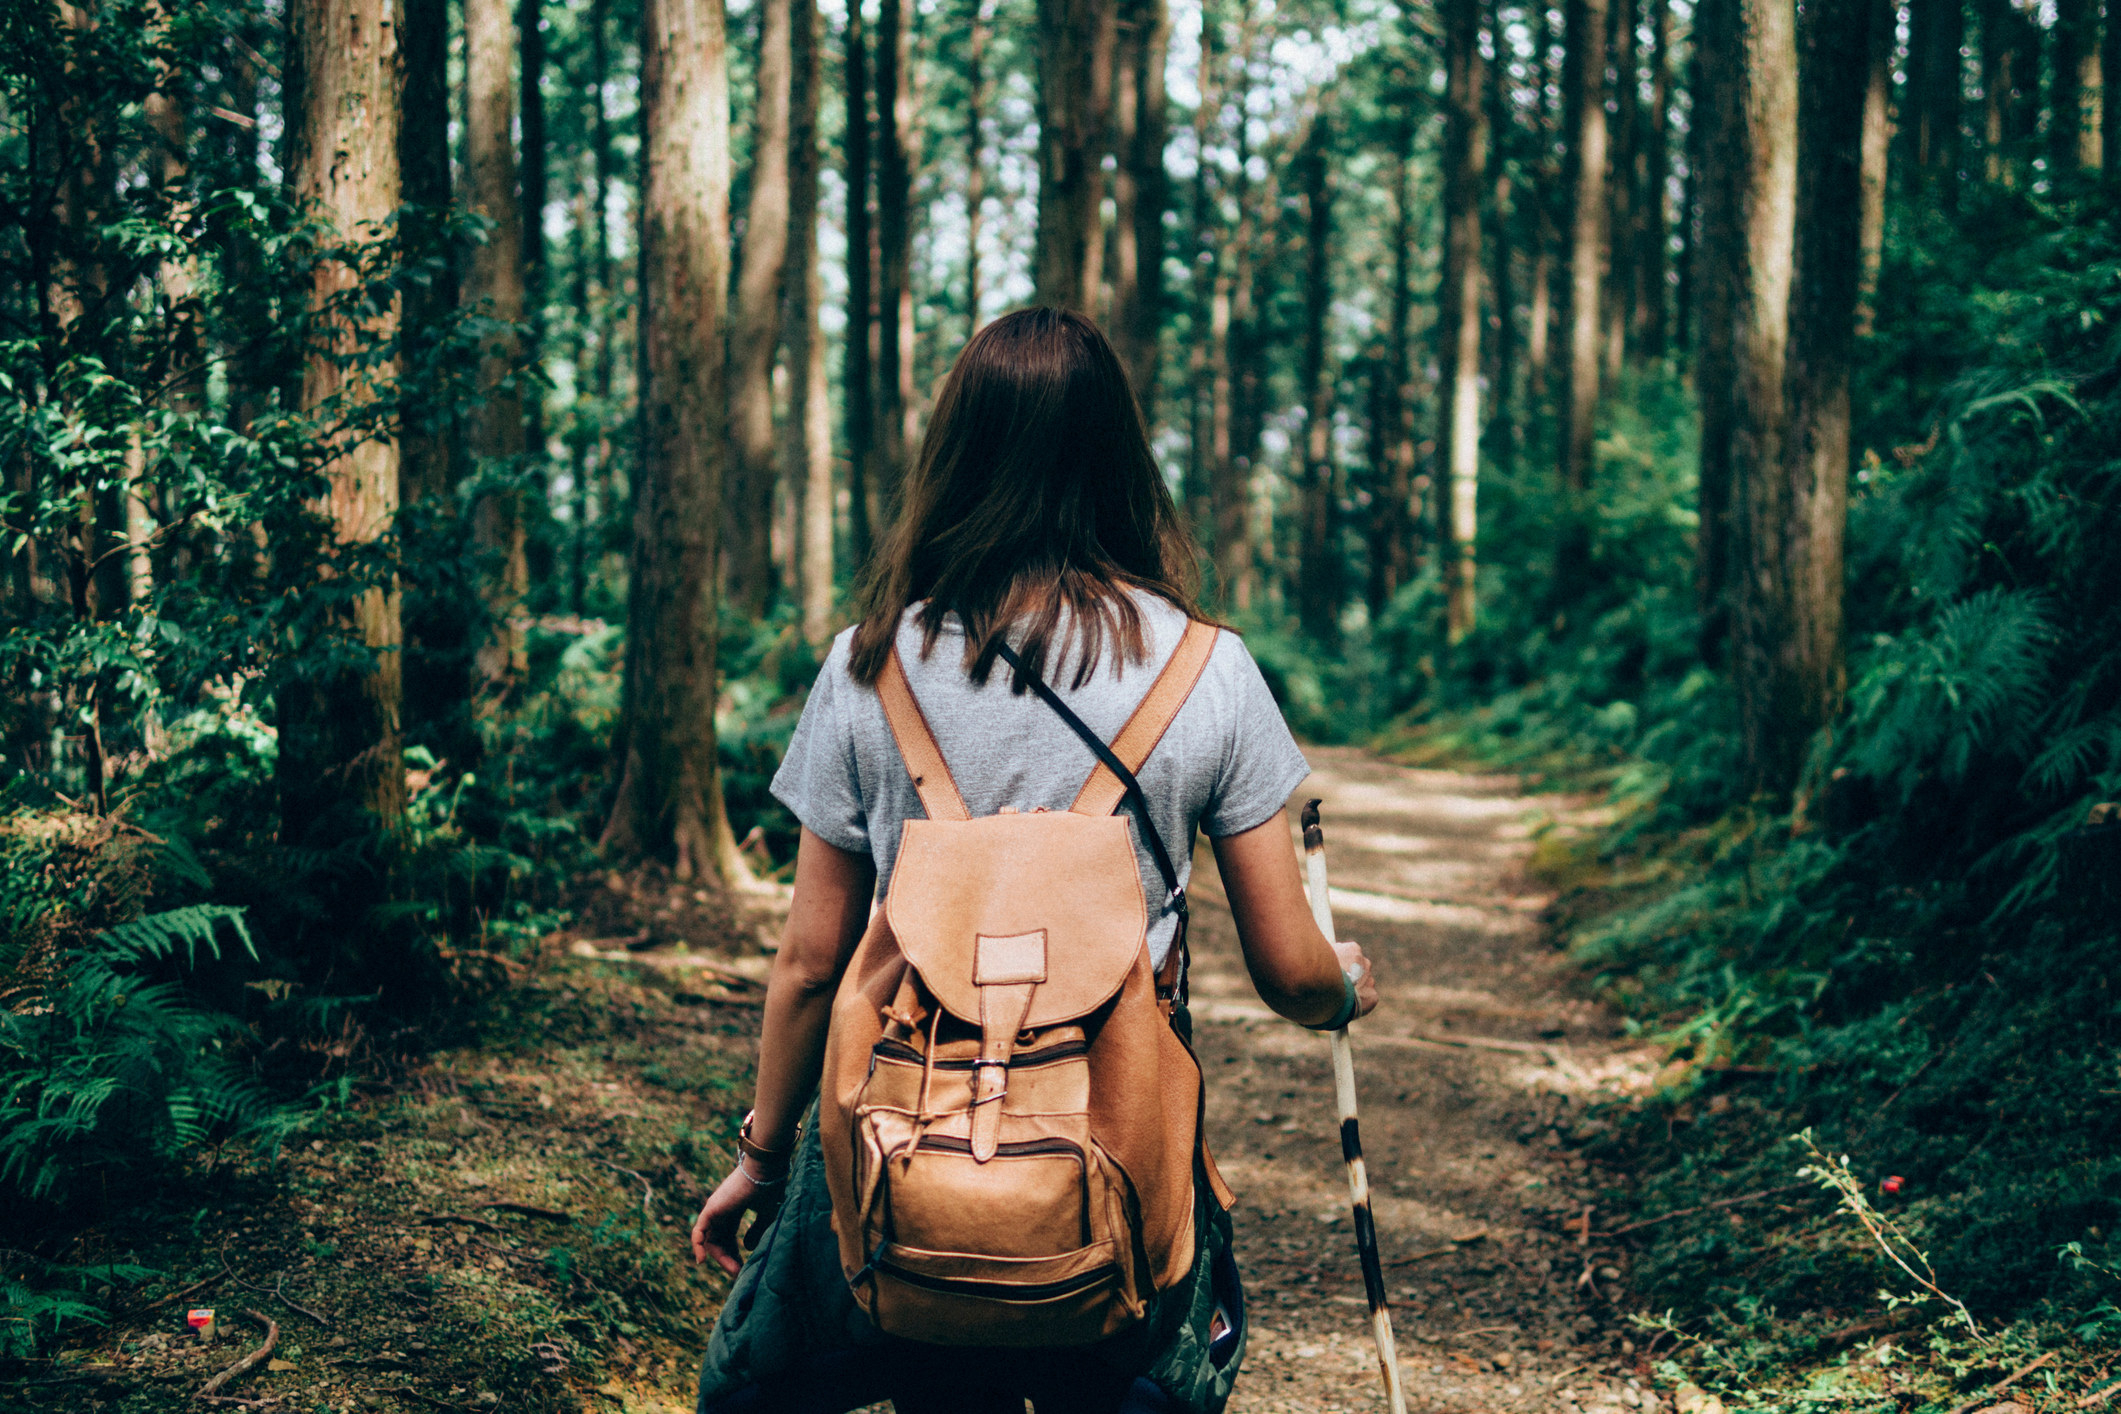 A woman walks down a hiking trail surrounded by a lush green forest